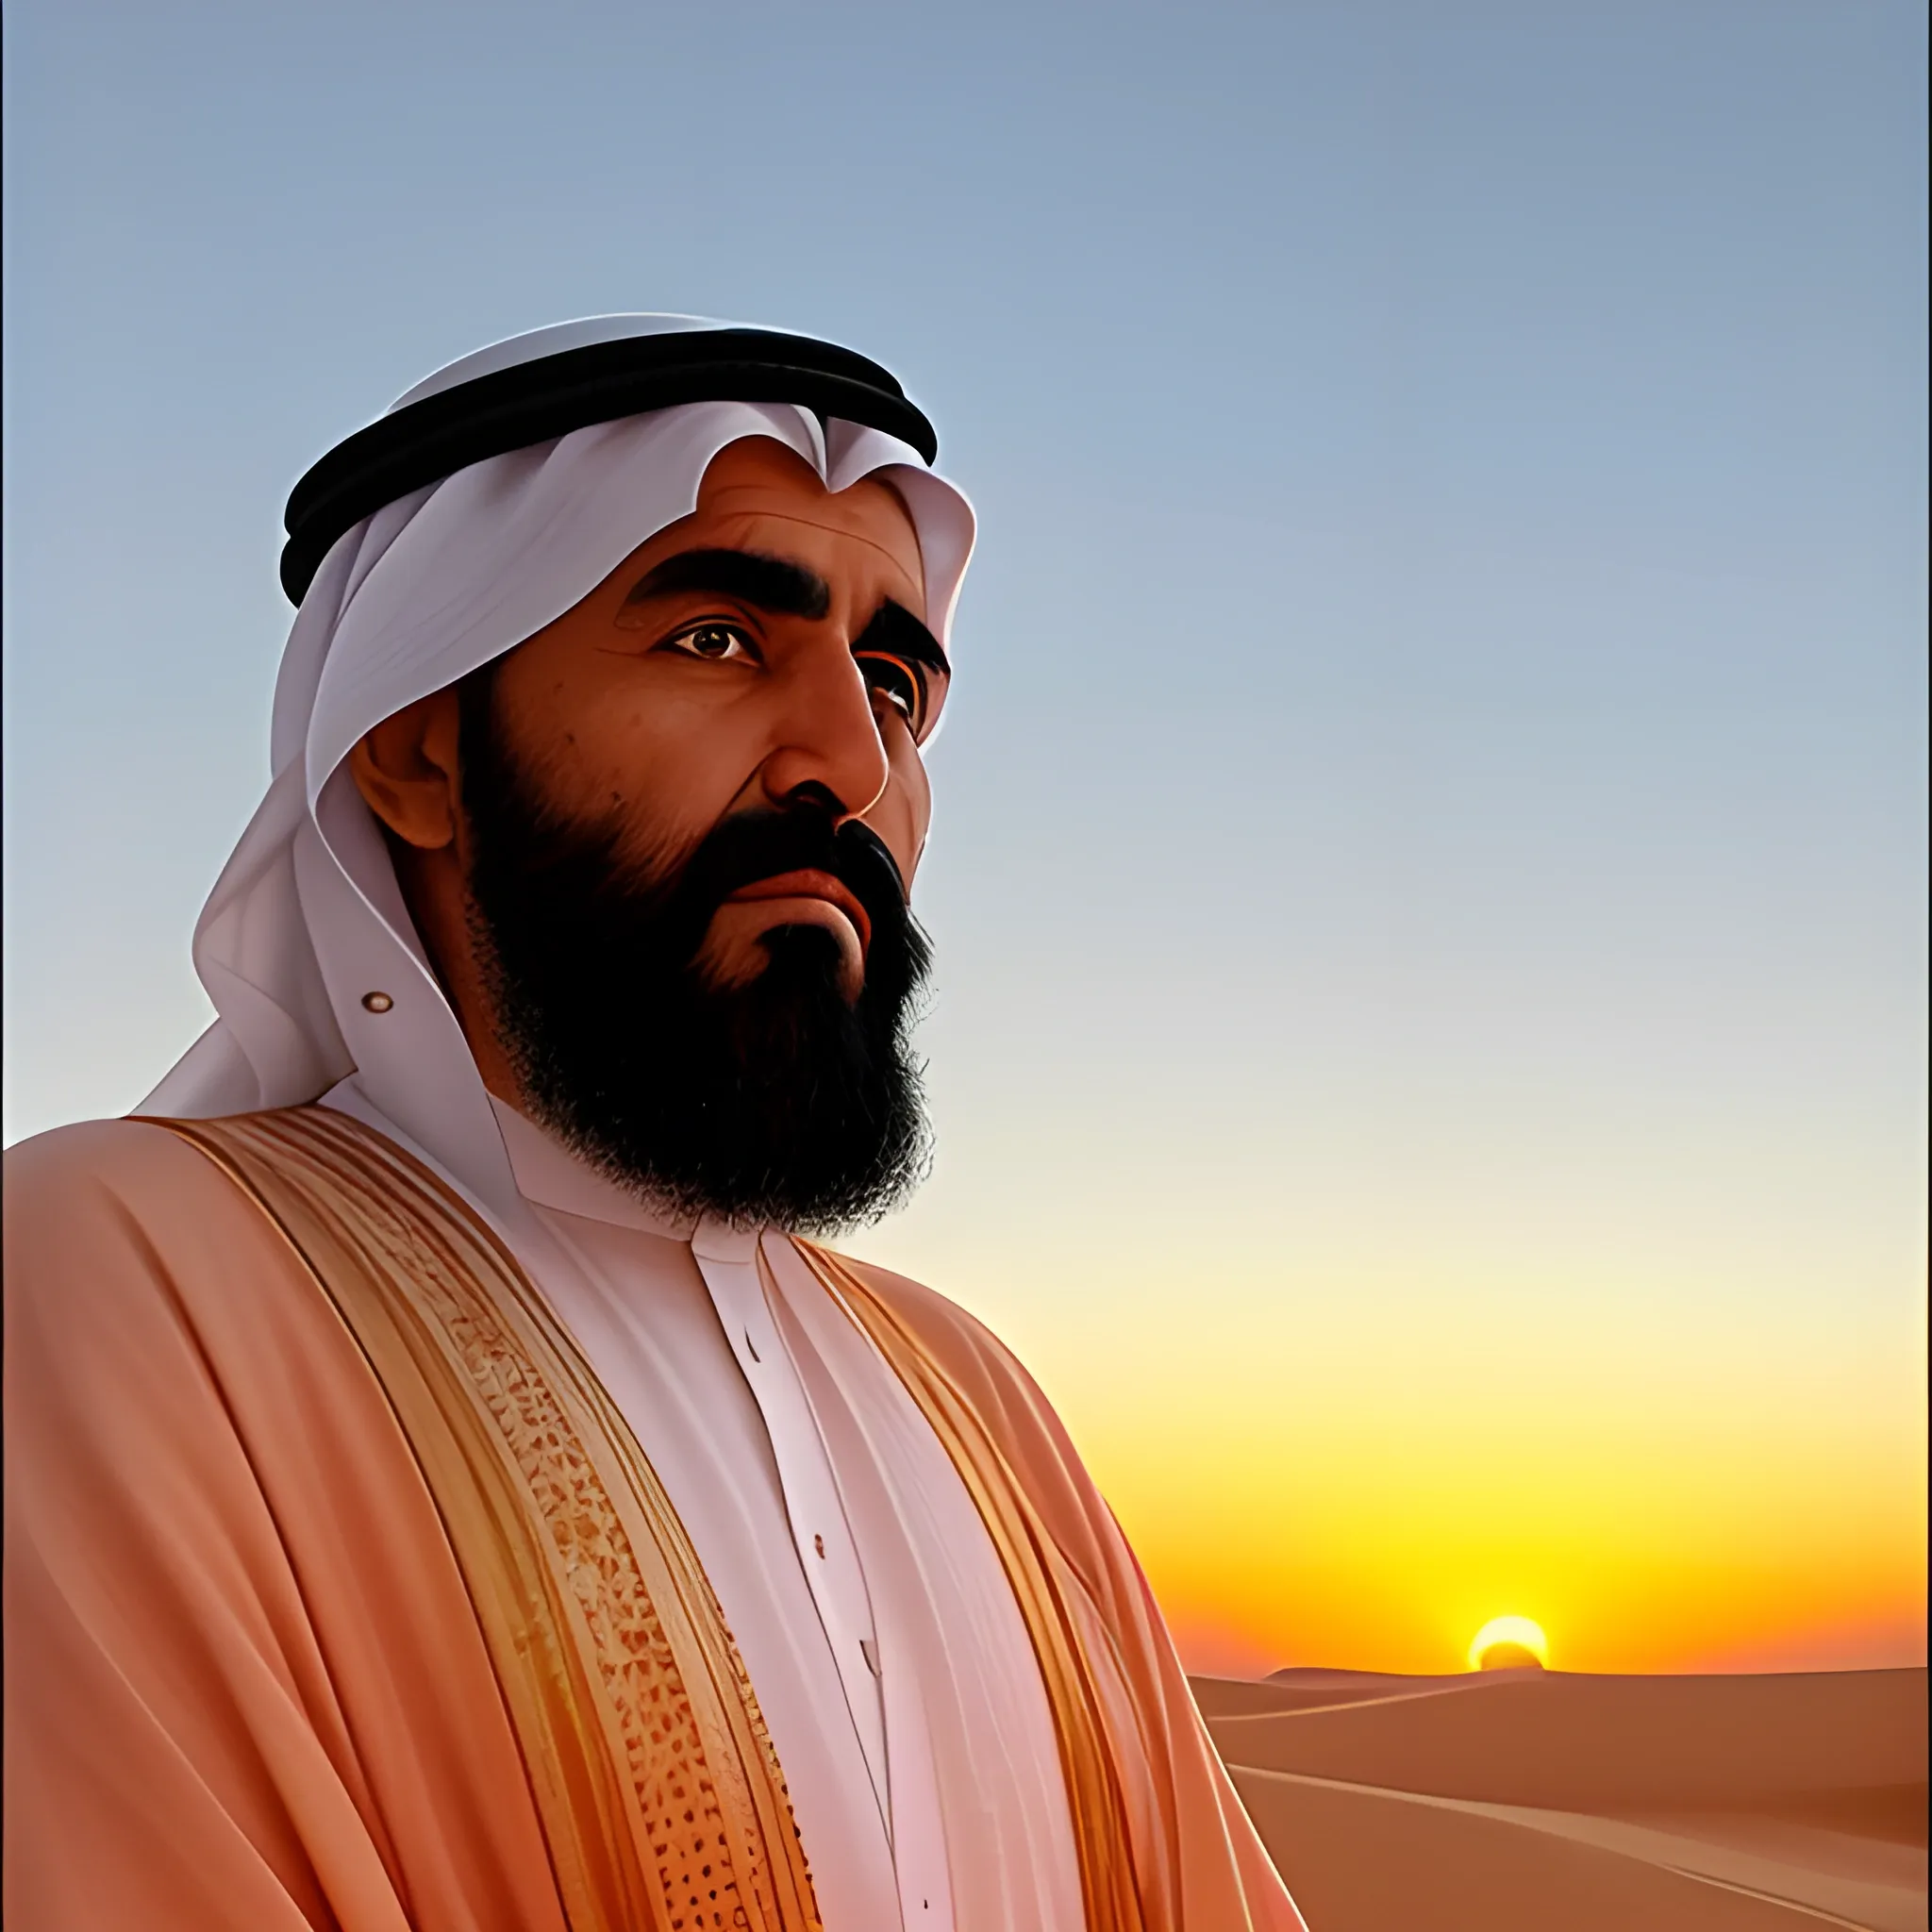 In the Arabian desert at sunset, the image of an Arab sheikh exudes a remarkable sense of dignity. This sheikh can be seen as a symbol of traditional Arab wisdom and strength. Here is a description in English:

The sheikh is seated on the desert sands, with orange and rosy clouds illuminating the evening sky behind him. He is wearing a traditional white woolen robe, a color that symbolizes purity and his heart's cleanliness. His head is left uncovered, allowing him to feel the warm but gentle rays of the setting sun on his forehead.

The sheikh's facial features reflect seriousness and solemnity. He has a long, thick black beard that speaks of years of wisdom and experience. His eyes are deep and dark, contemplating the horizon with focus, reflecting strength and stability. His broad, round forehead exudes wisdom and confidence. Under his eyes, you can see the marks of the long years spent in his journeys across the desert.

The sheikh holds a beautifully carved wooden staff in his left hand, symbolizing authority and leadership. He appears ready to make wise decisions in this tranquil and stunning desert moment.

This Arab sheikh combines beauty, seriousness, and strength, embodying the heritage of the desert and traditional Arab values.